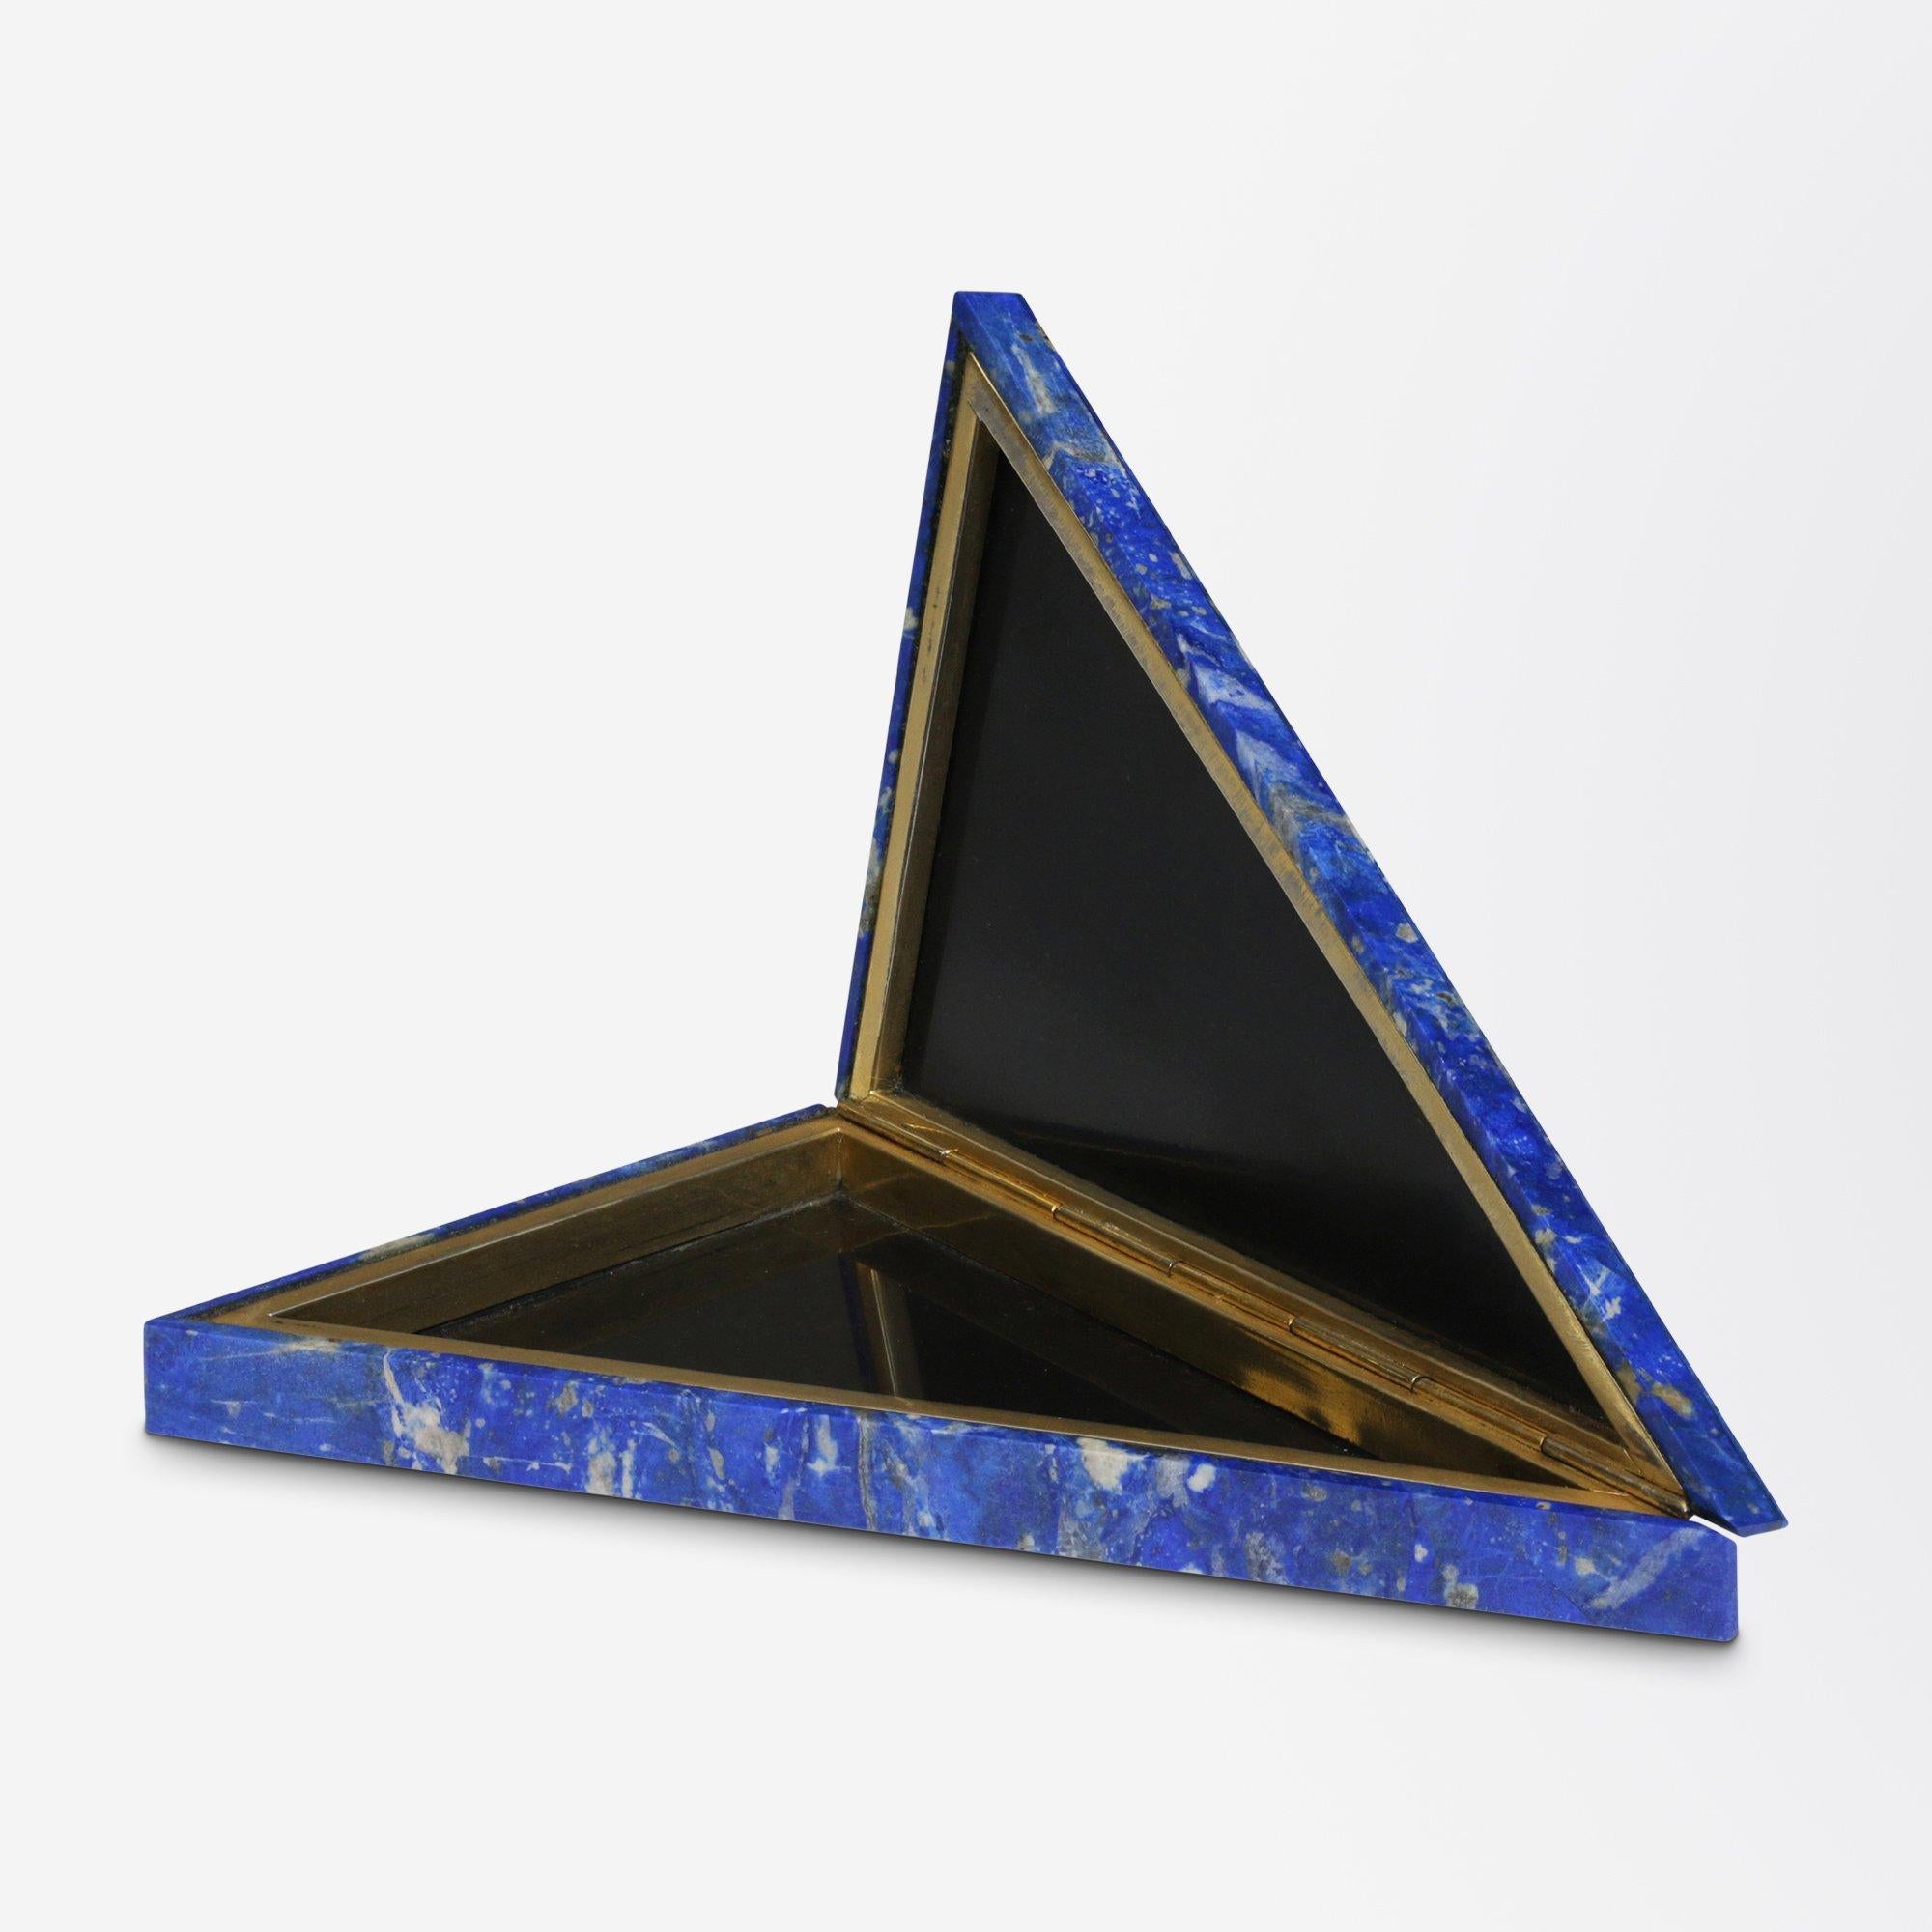 An exceedingly beautiful lapis lazuli specimen box crafted and retailed by 'Pitti Mosaici' in Firenze (Florence). The triangular shaped box is crafted from fine sheets of lapis lazuli and is accented internally with gilt metal hardware. The piece